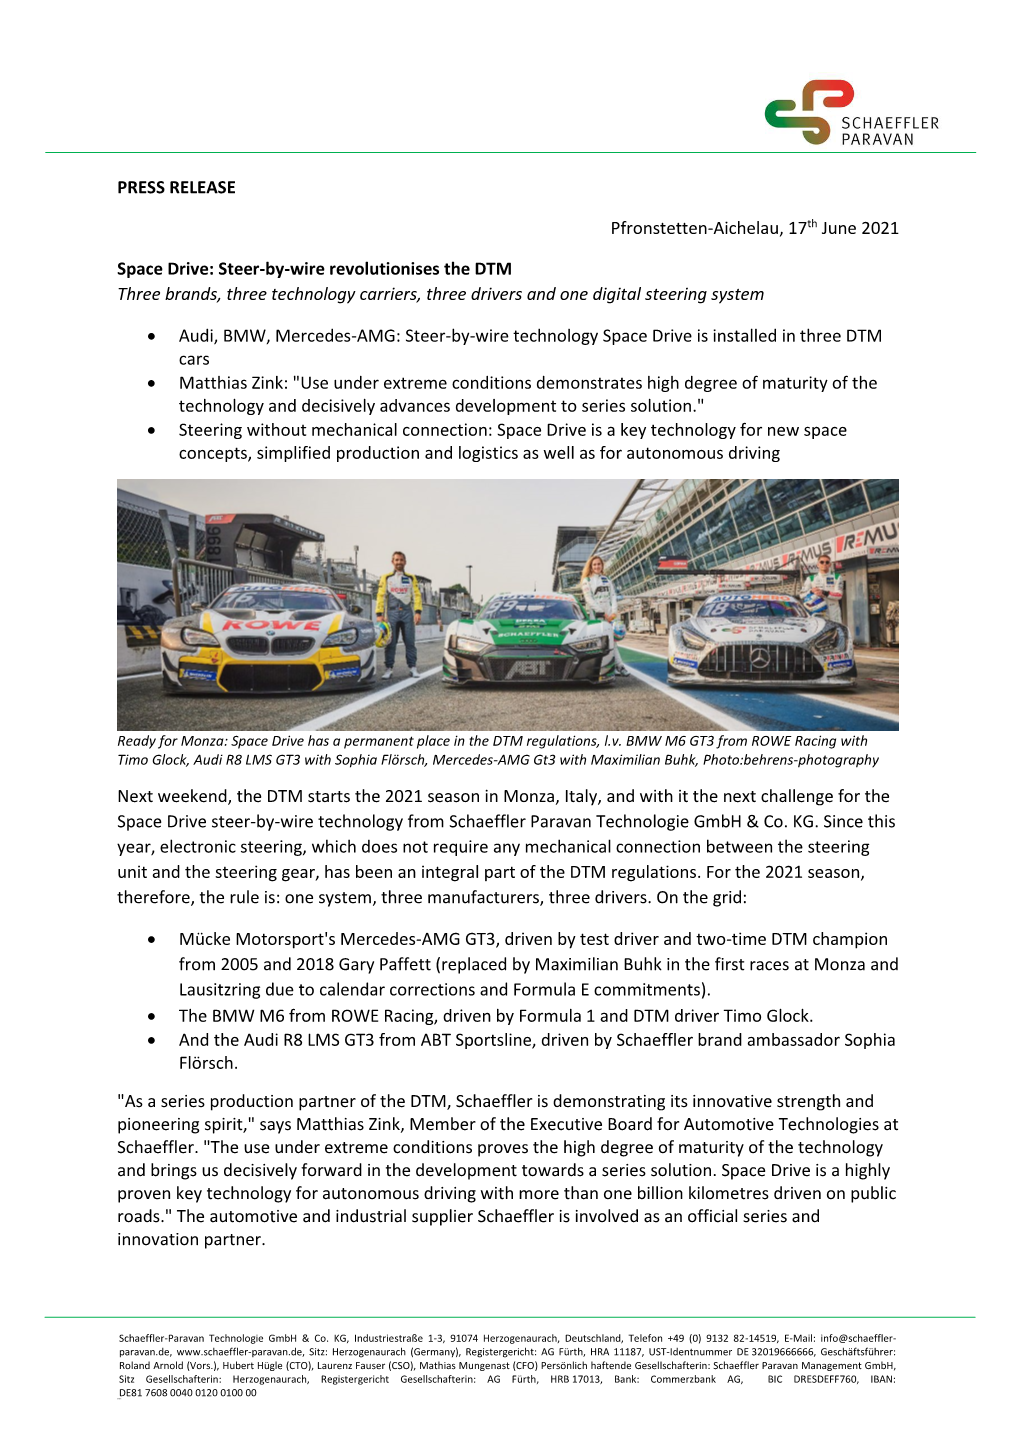 PRESS RELEASE Pfronstetten-Aichelau, 17Th June 2021 Space Drive: Steer-By-Wire Revolutionises the DTM Three Brands, Three Techno